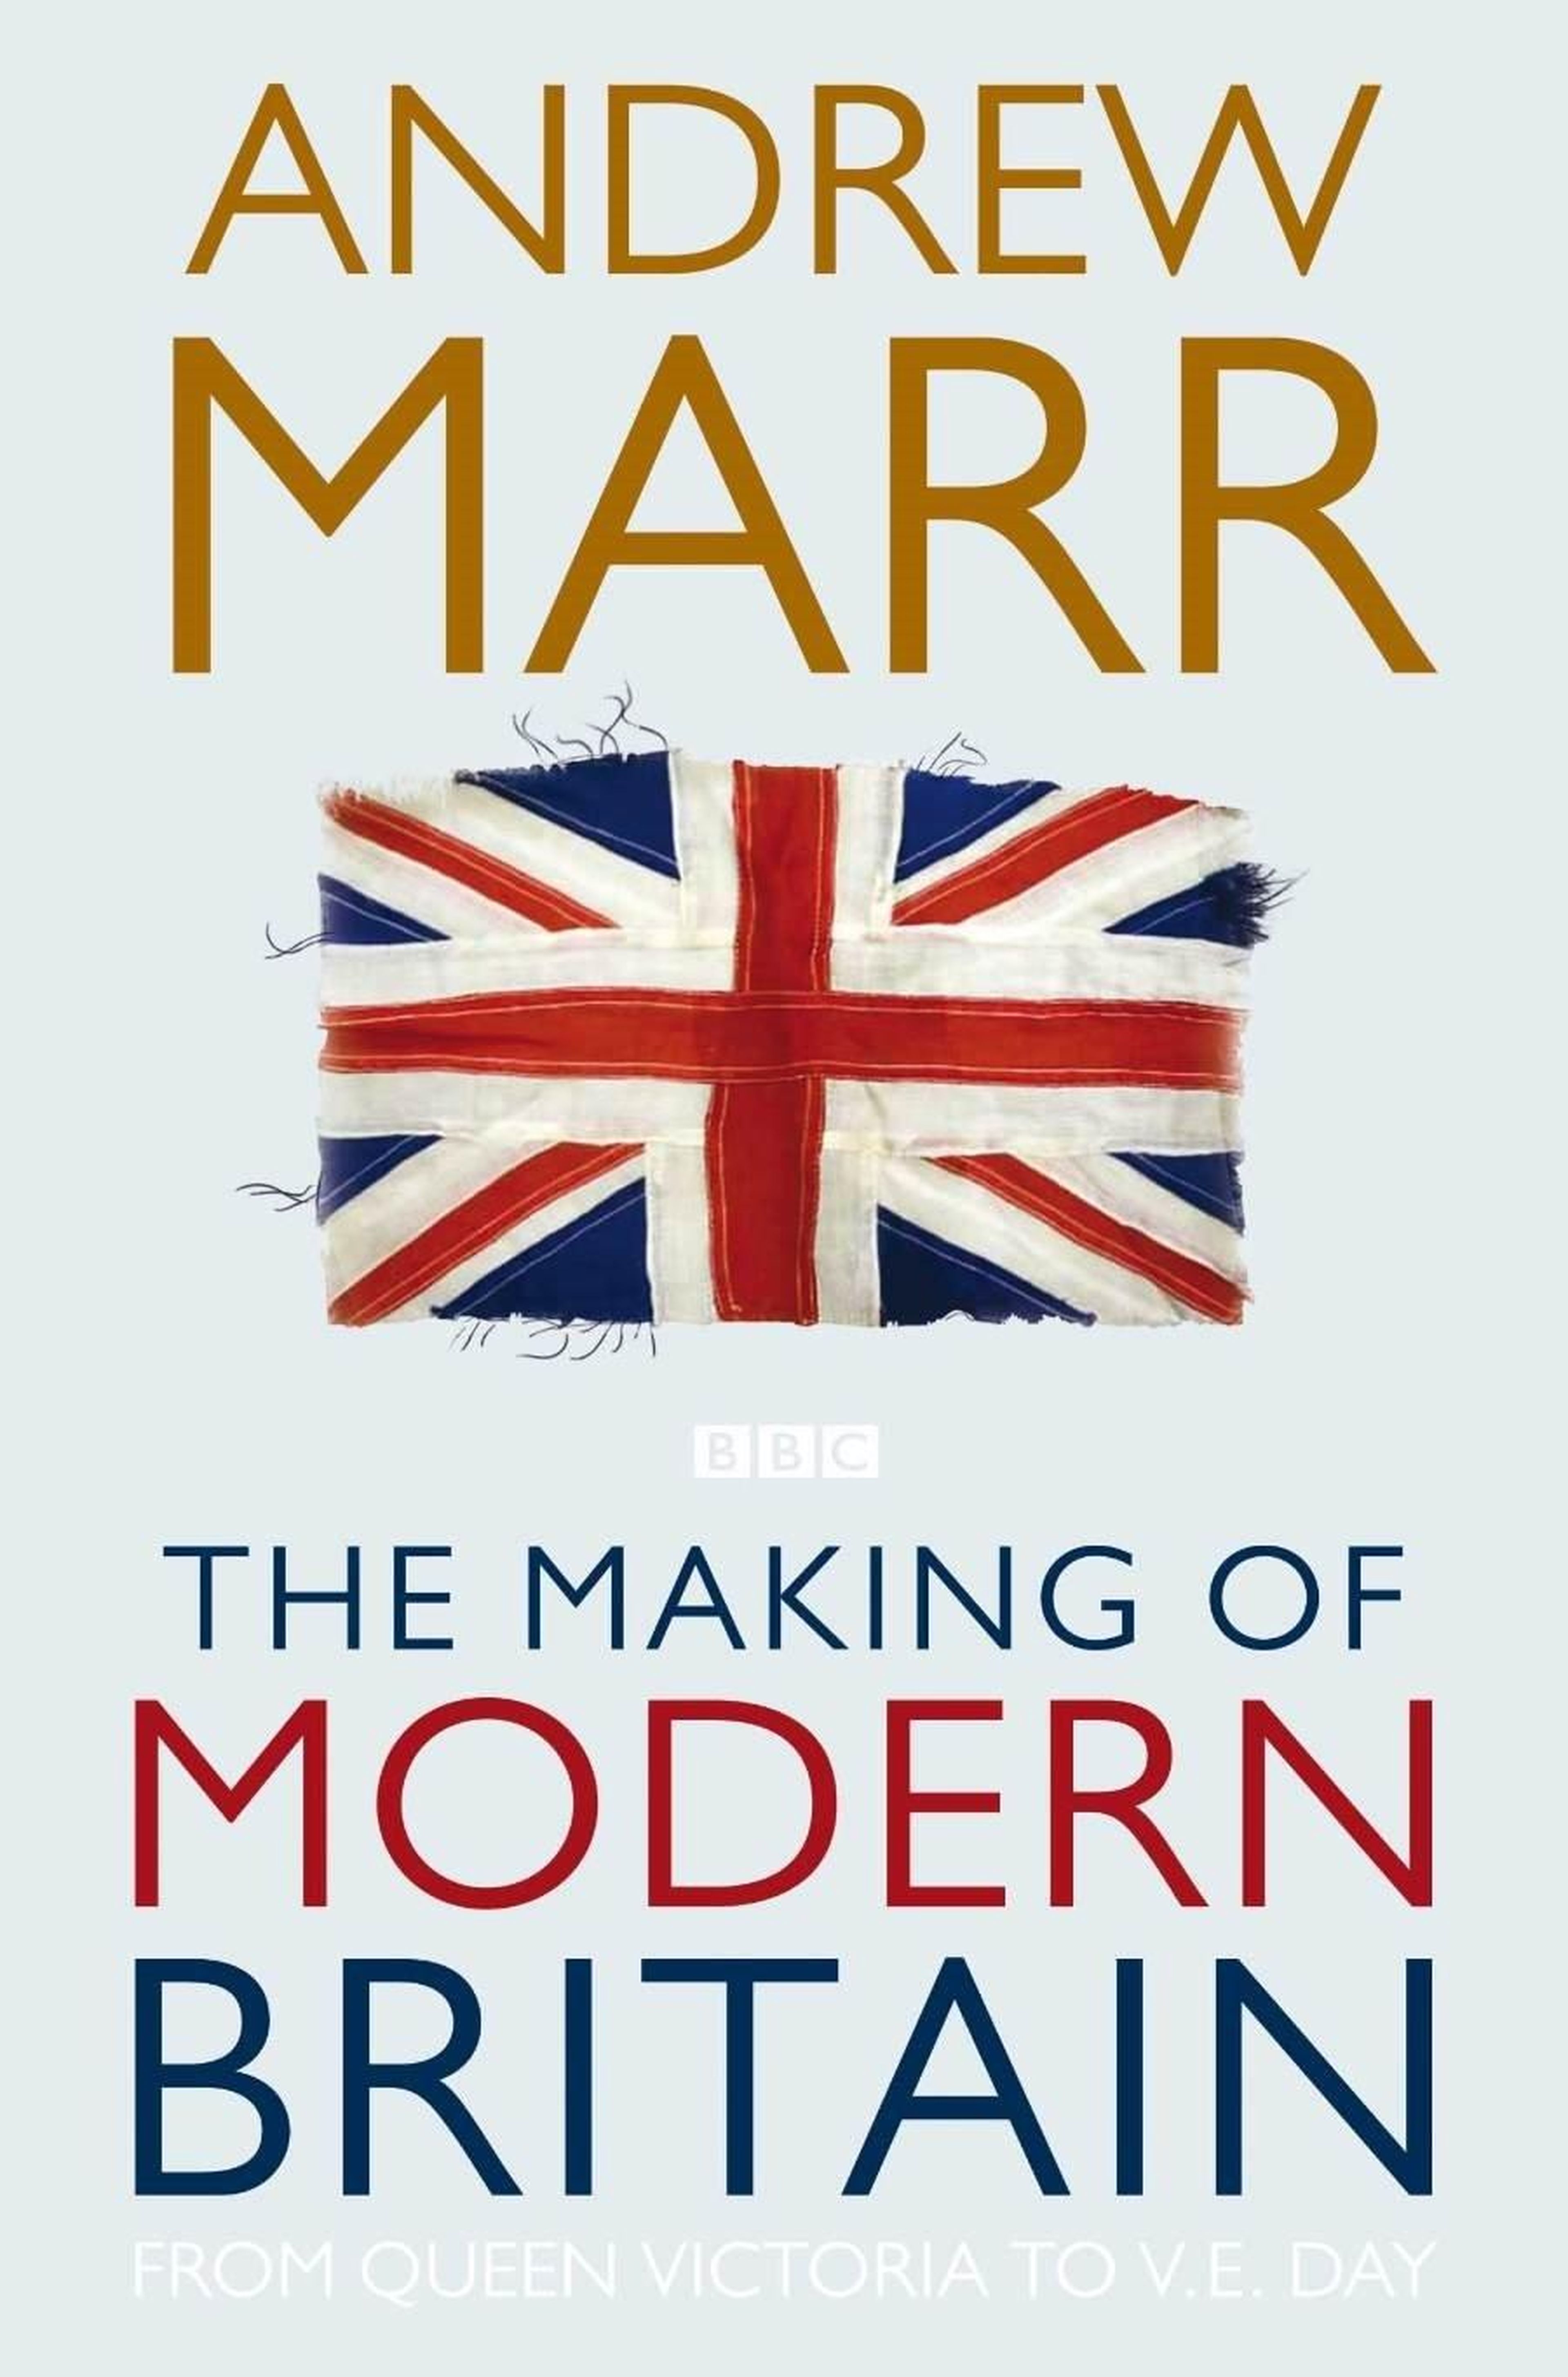 "The Making of Modern Britain" by Andrew Marr